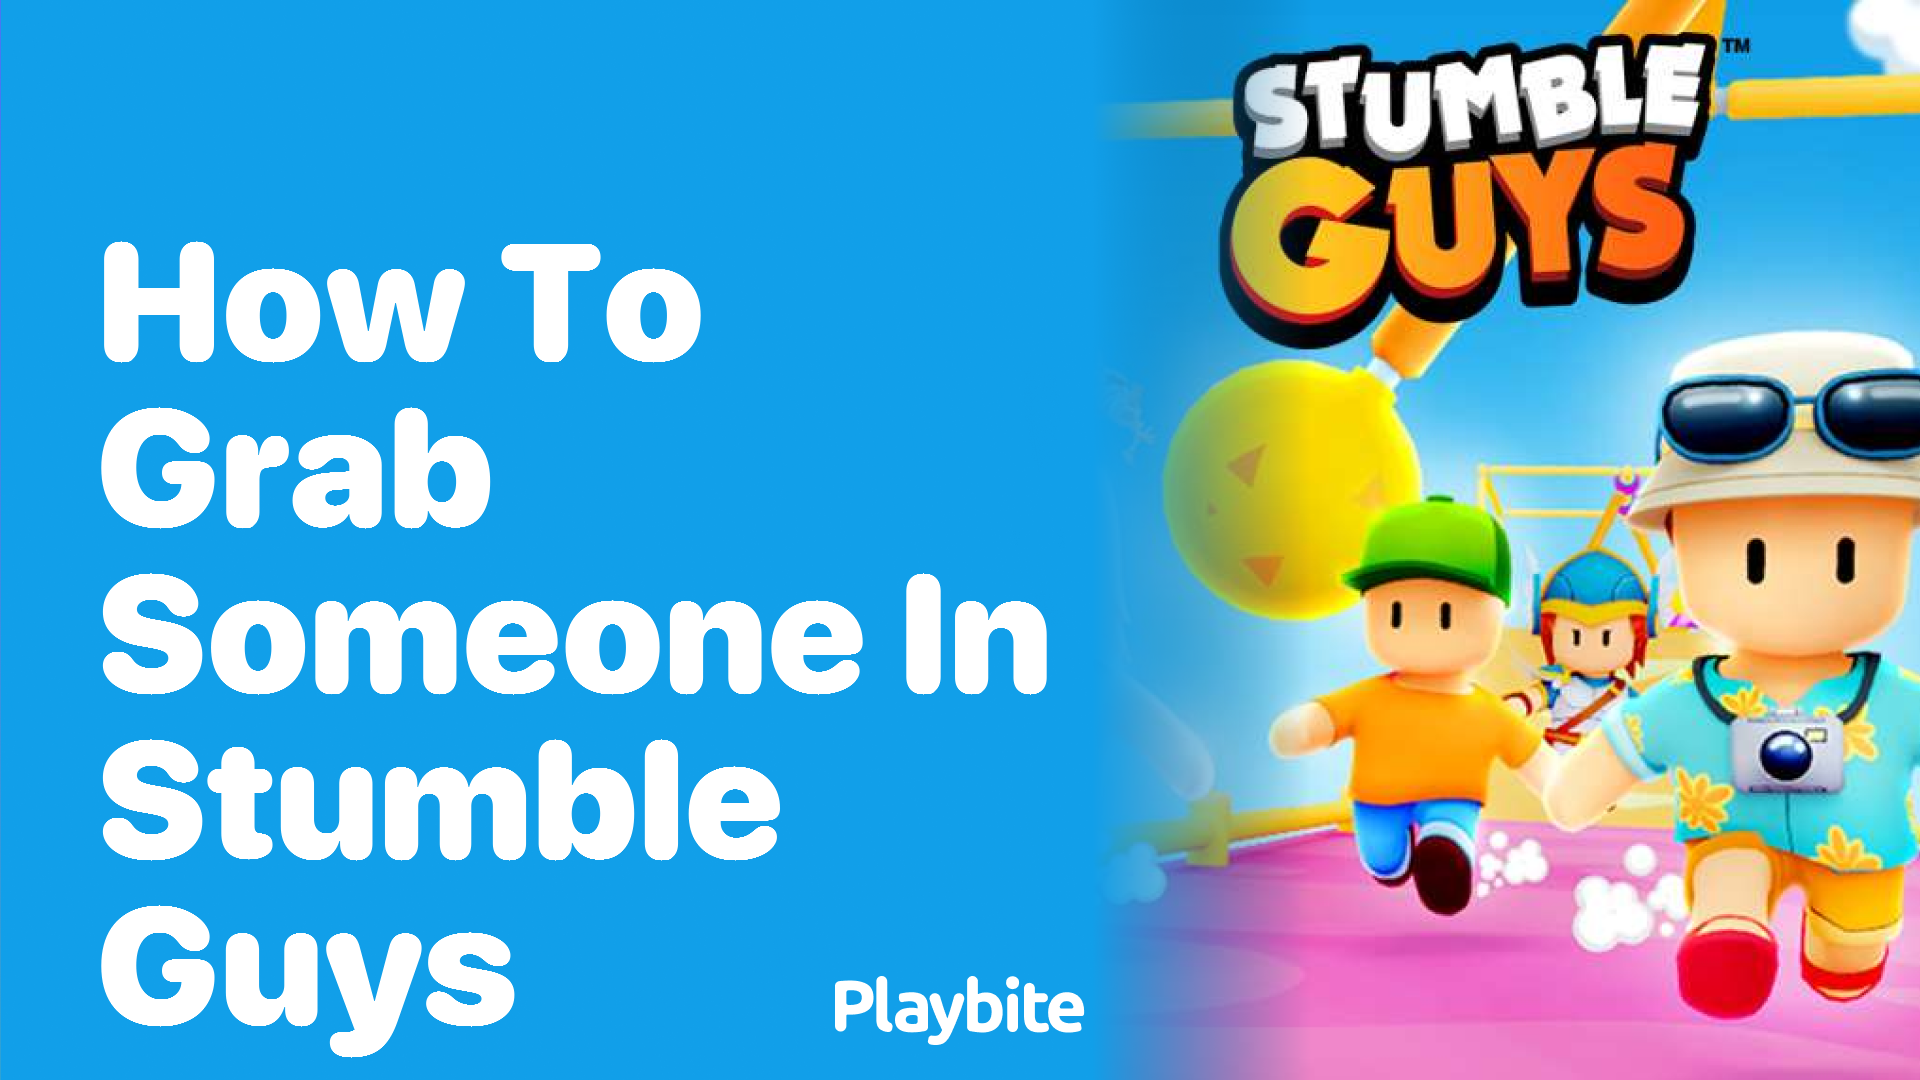 How to Grab Someone in Stumble Guys: A Quick Guide